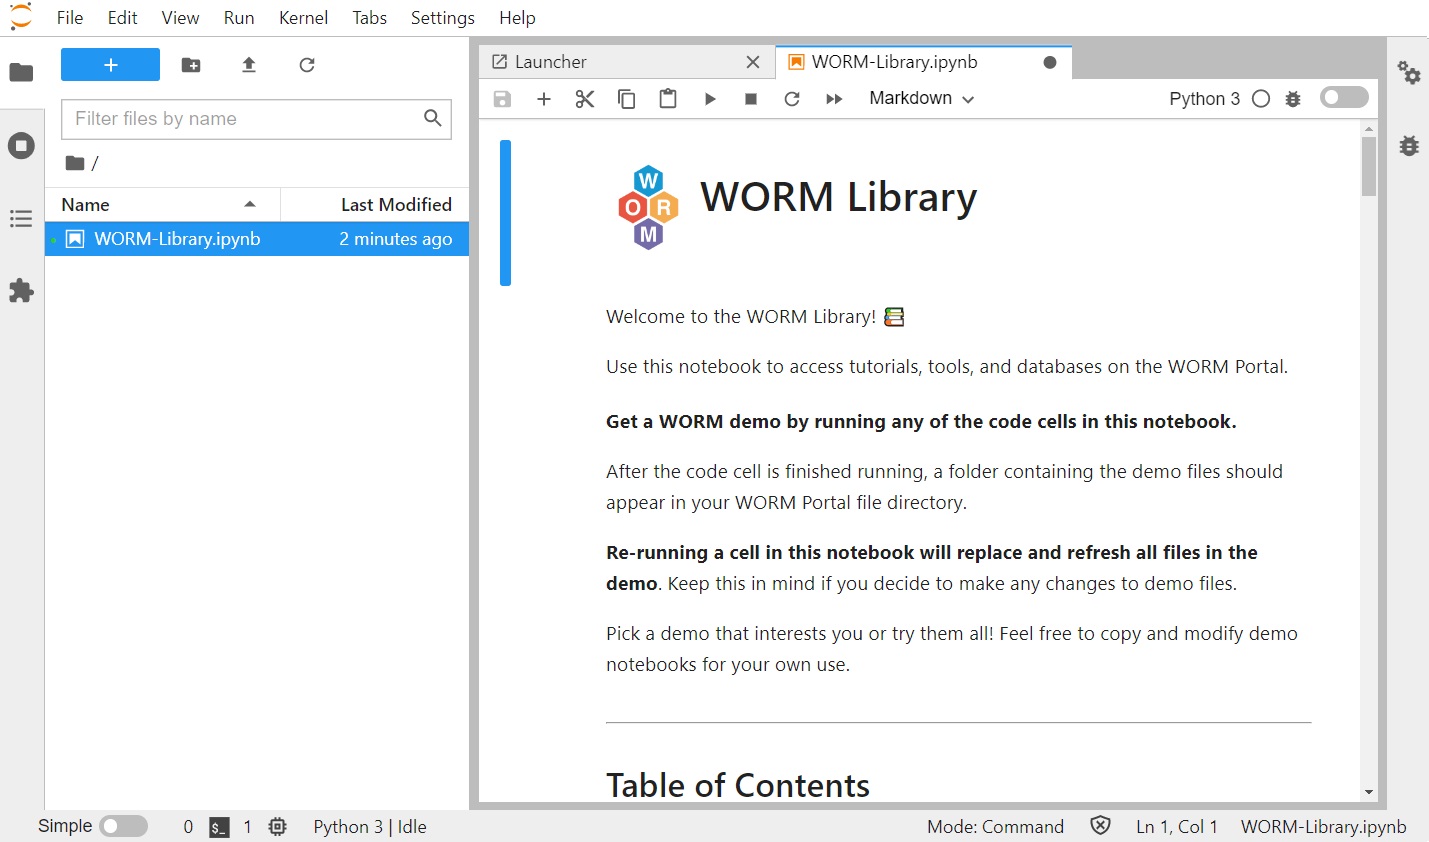 The WORM Library